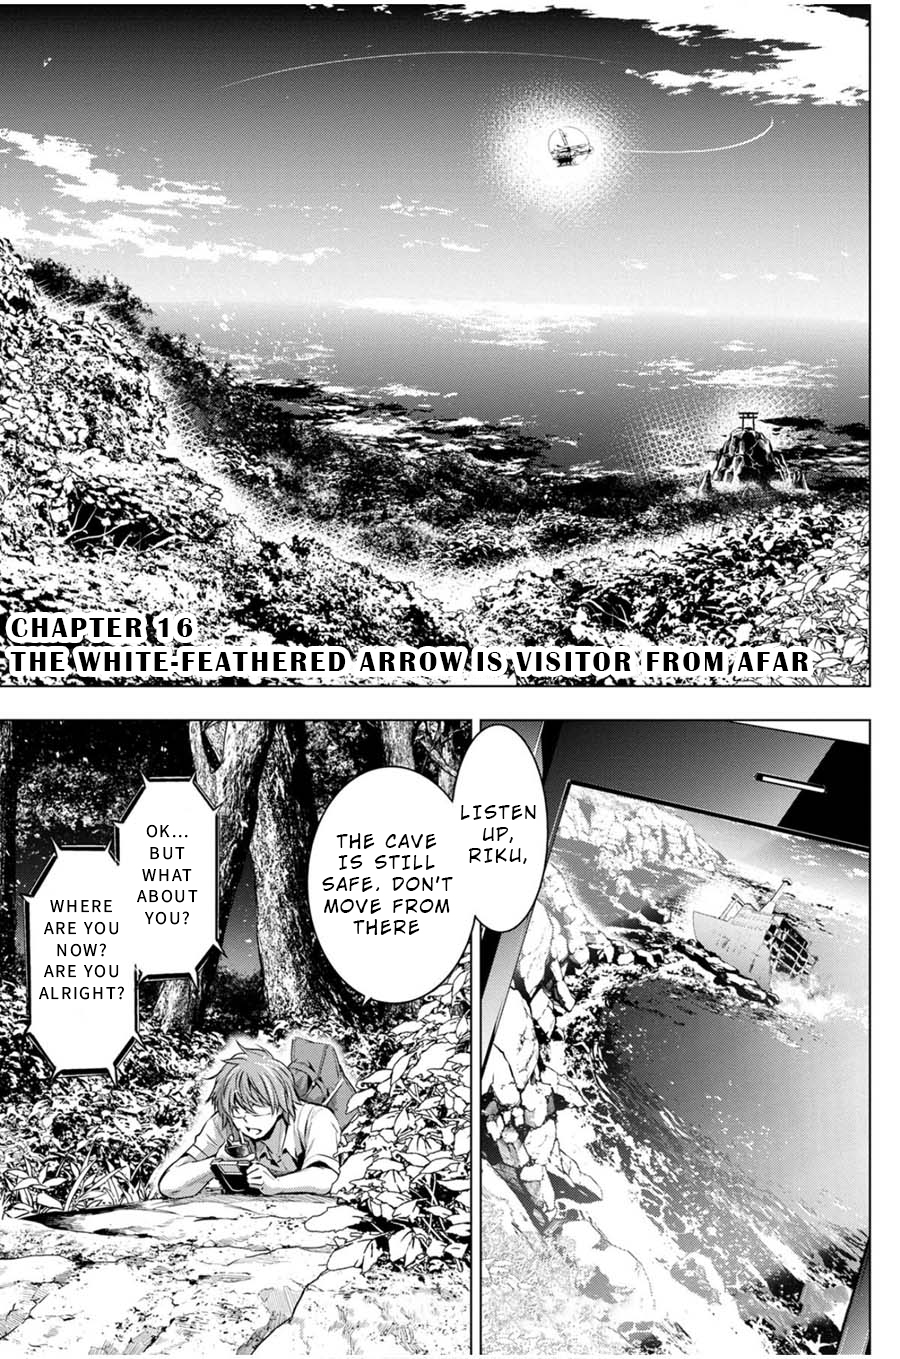 Ingoshima Vol. 3 Ch. 16 The White Feathered Arrow is Visitor From Afar